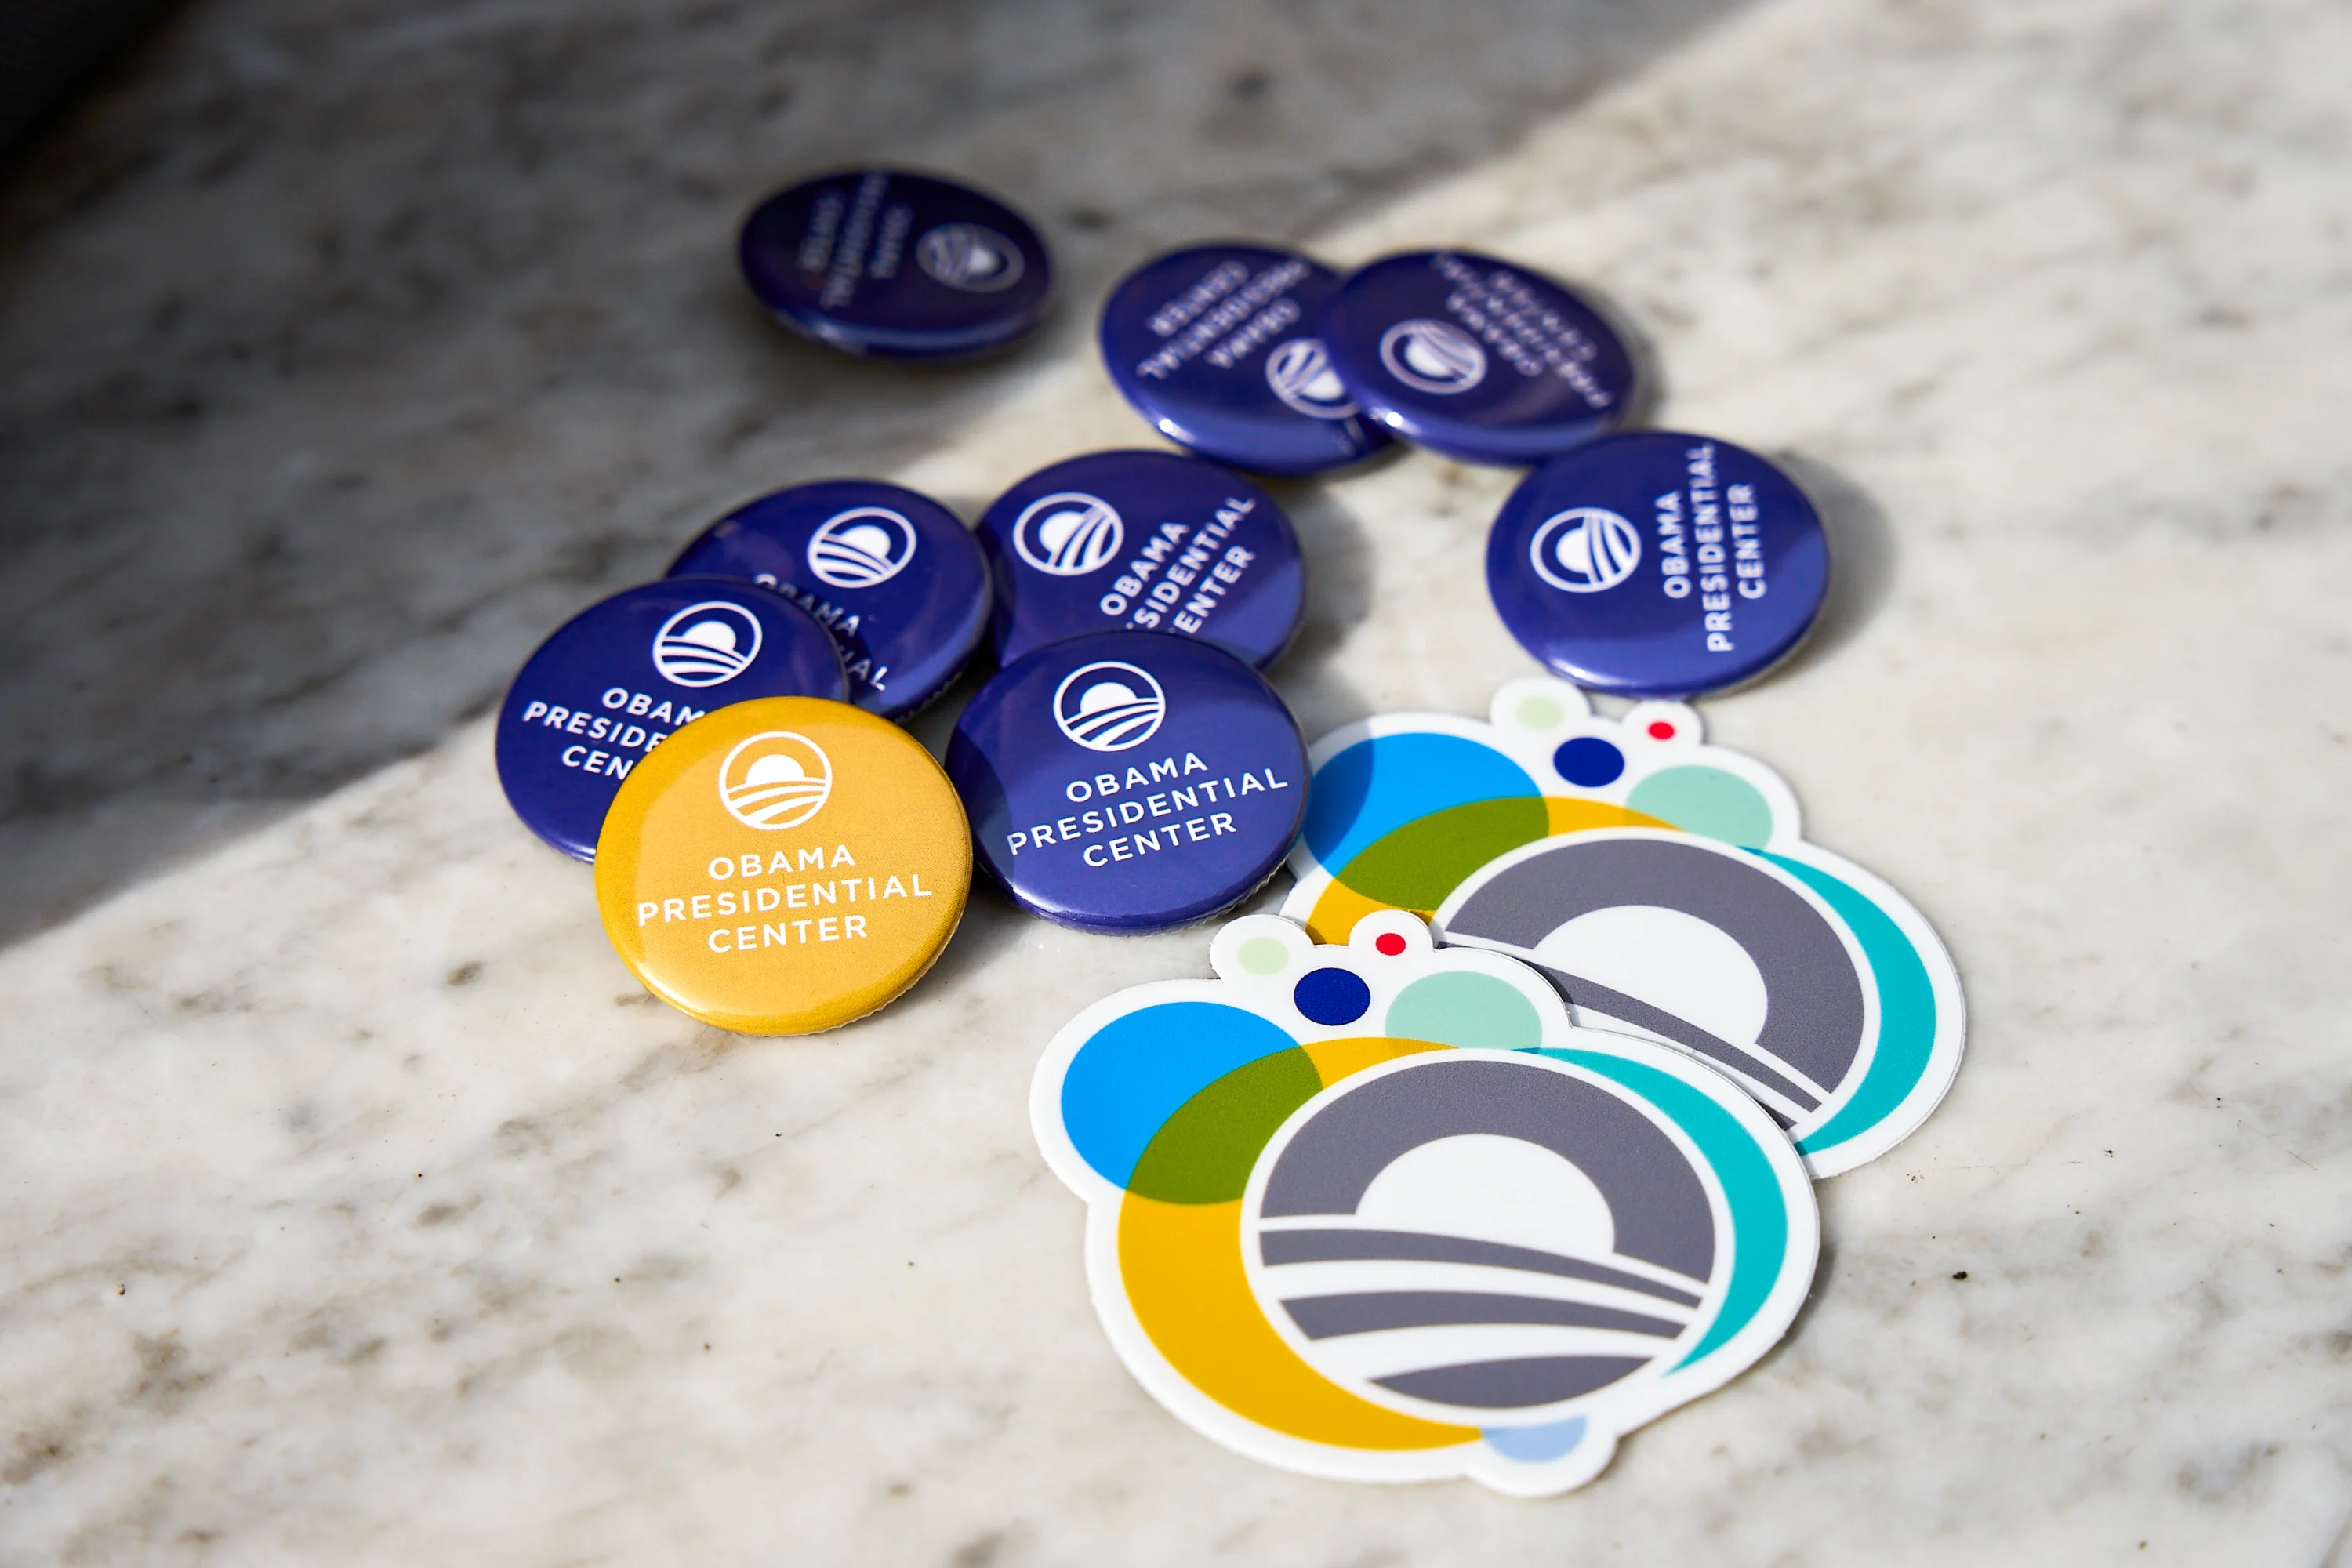 Several blue and yellow buttons that read 'OBAMA PRESIDENTIAL CENTER' and two Obama Foundation logo stickers lay across a sunny table.